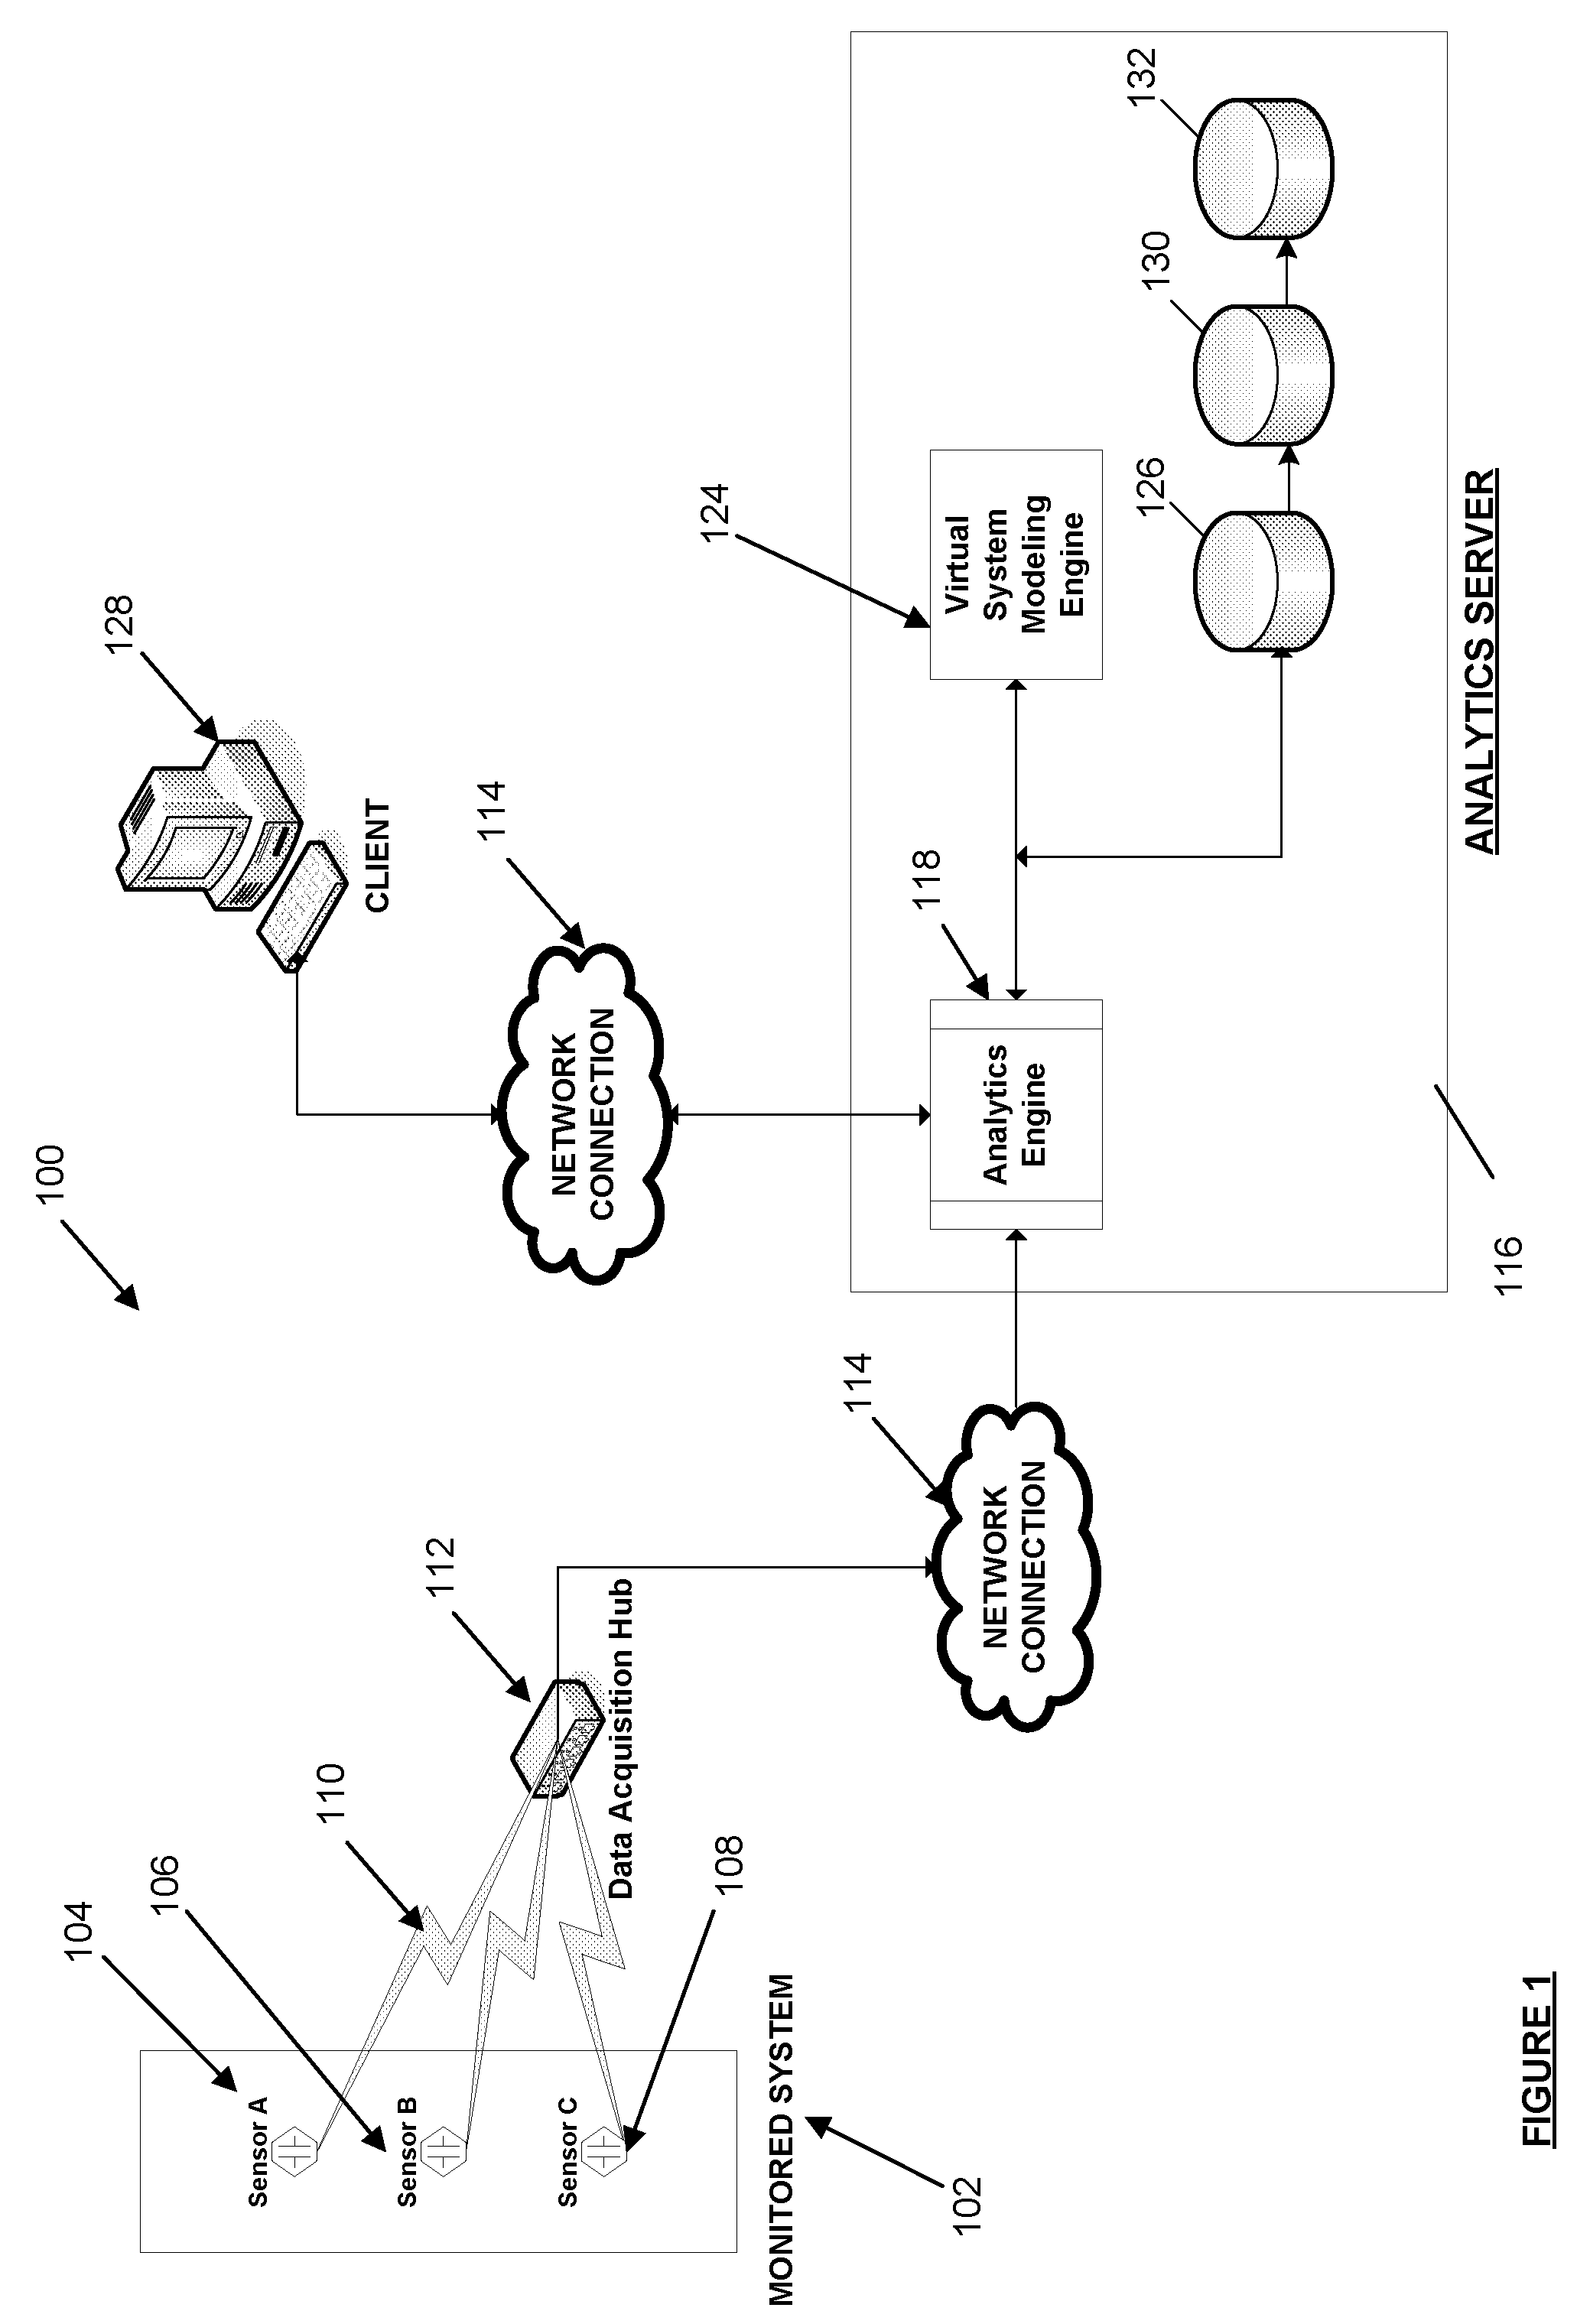 Systems and methods for real-time system monitoring and predictive analysis